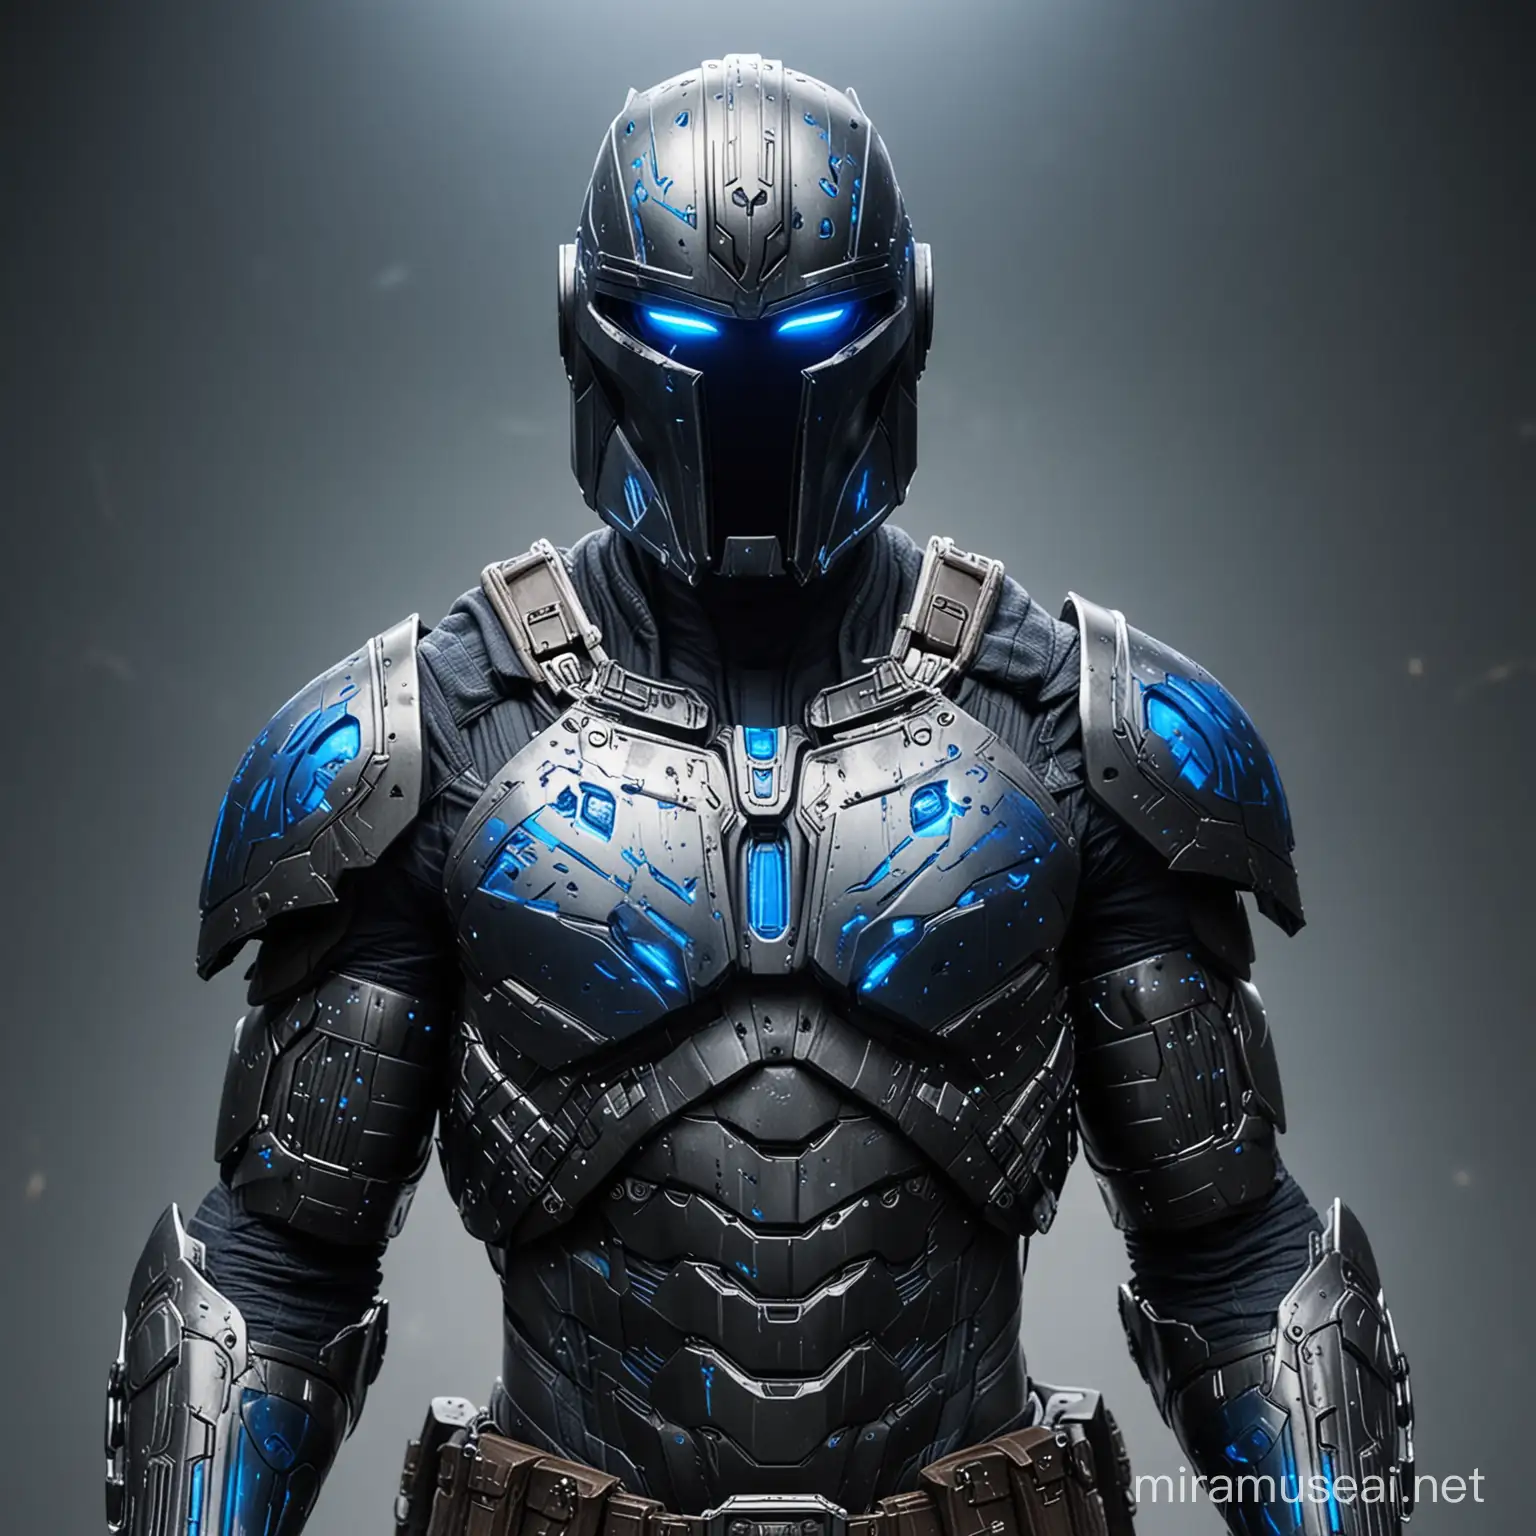 Mysterious Silver Knight in Wakandan Armor with Glowing Blue Mandalorian Eyes